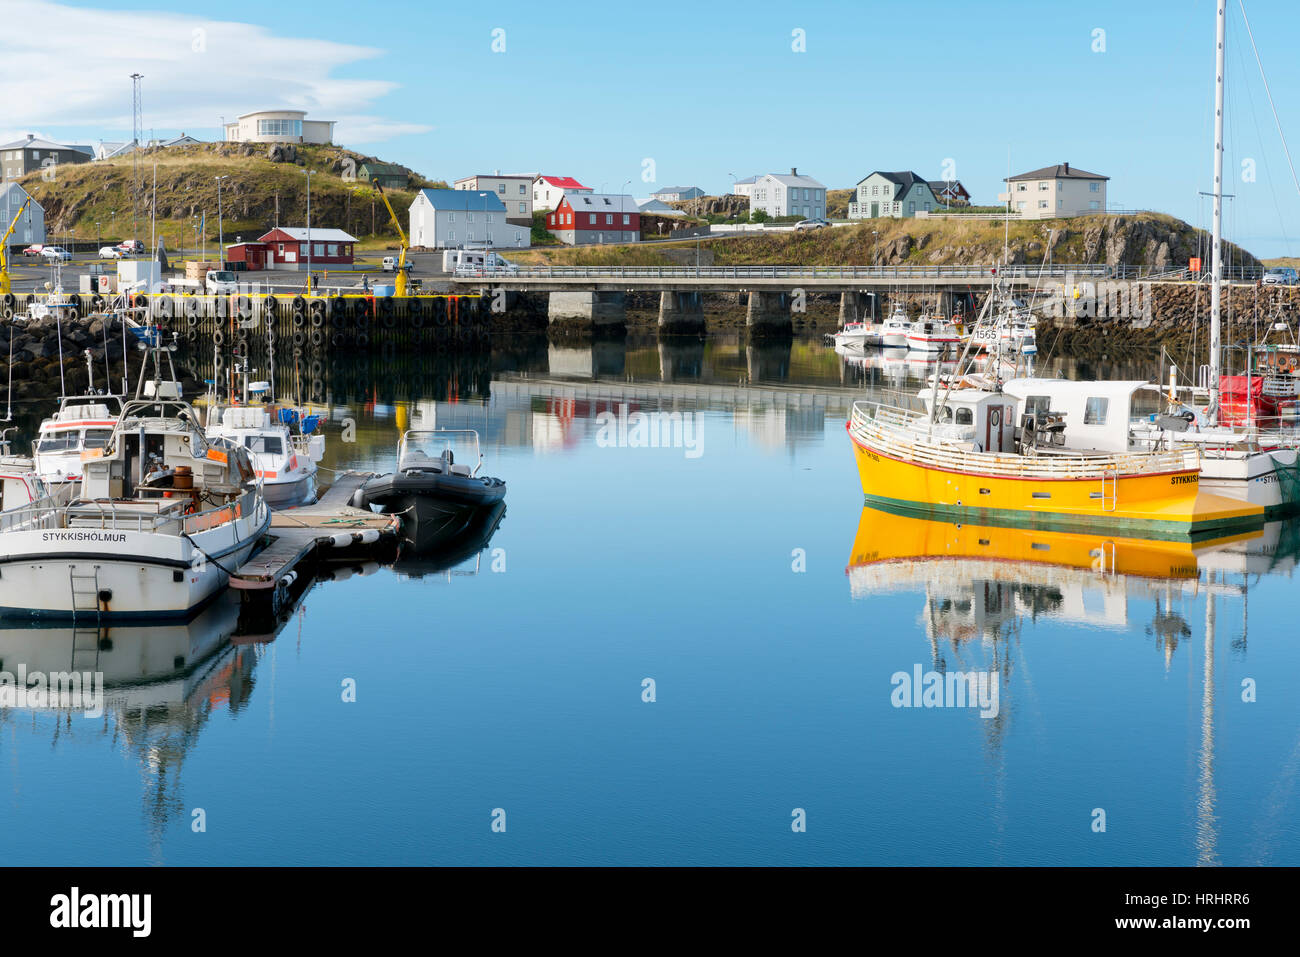 Boats in the Harbour at Stykkisholmur, Iceland, Polar Regions Stock Photo